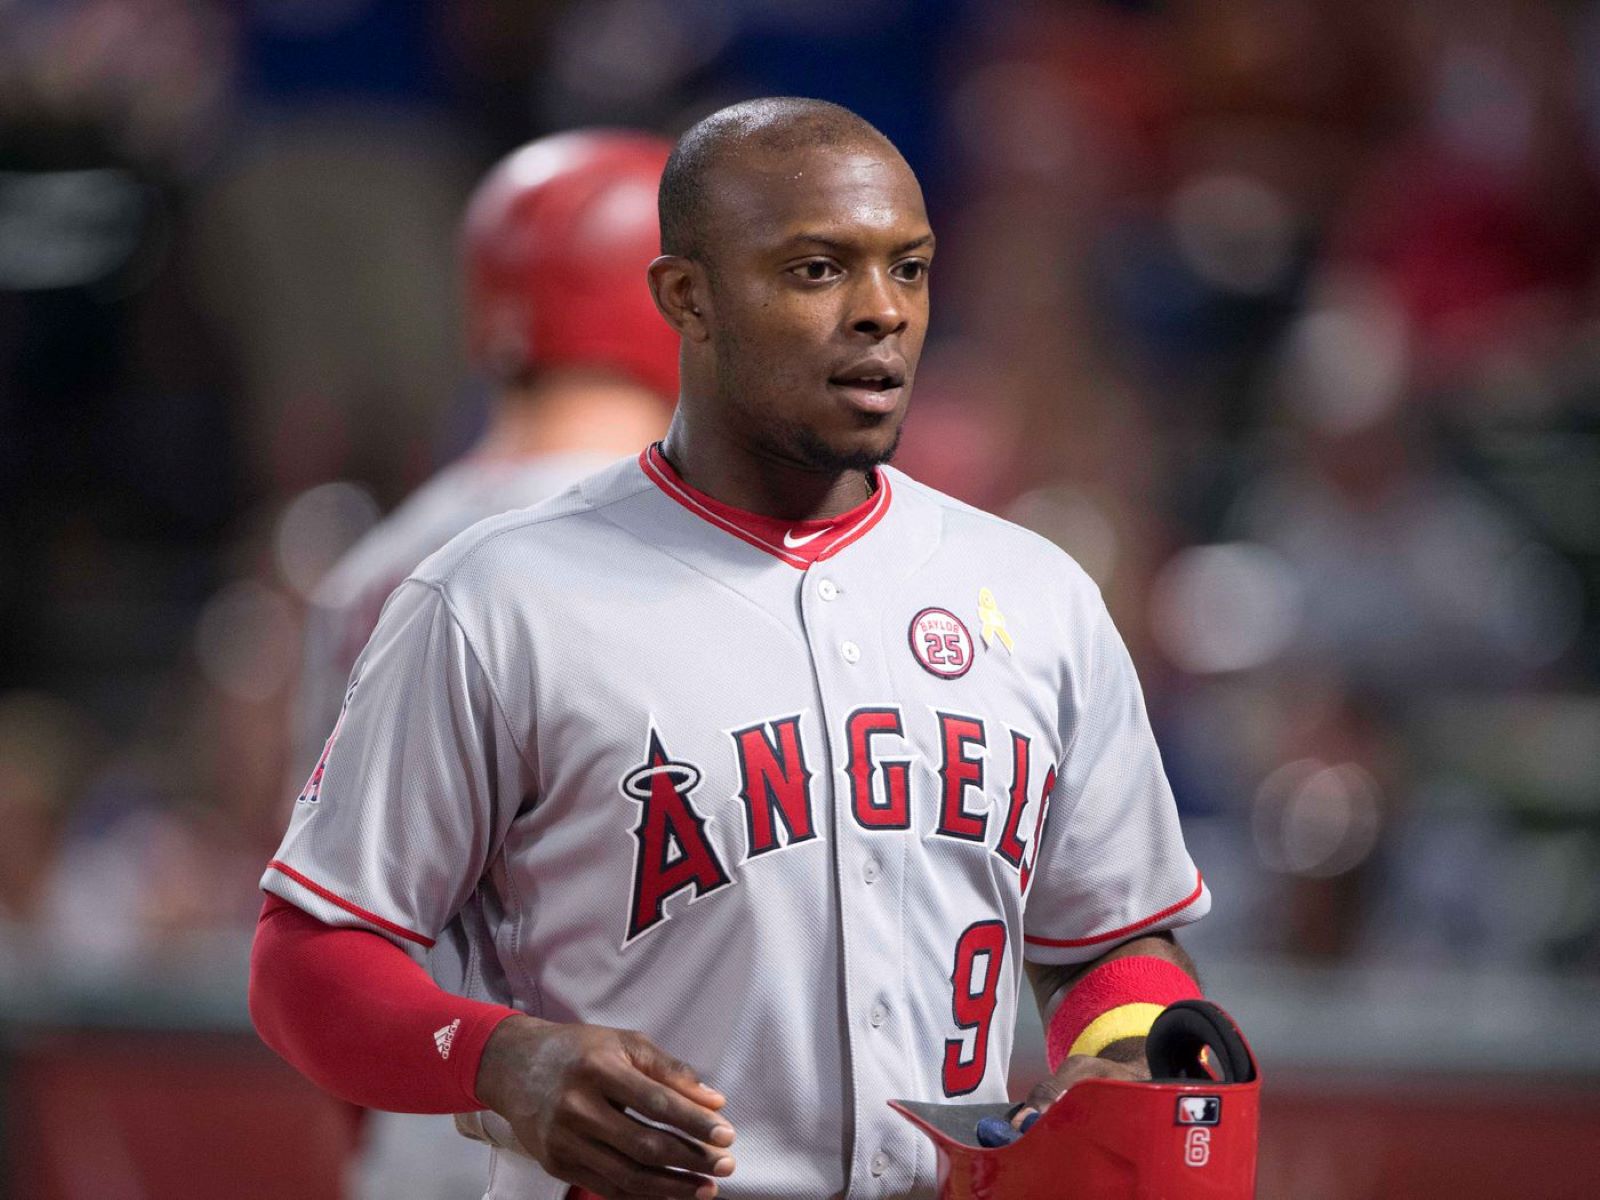 After four years as Melvin Upton Jr., B.J. Upton is back to being